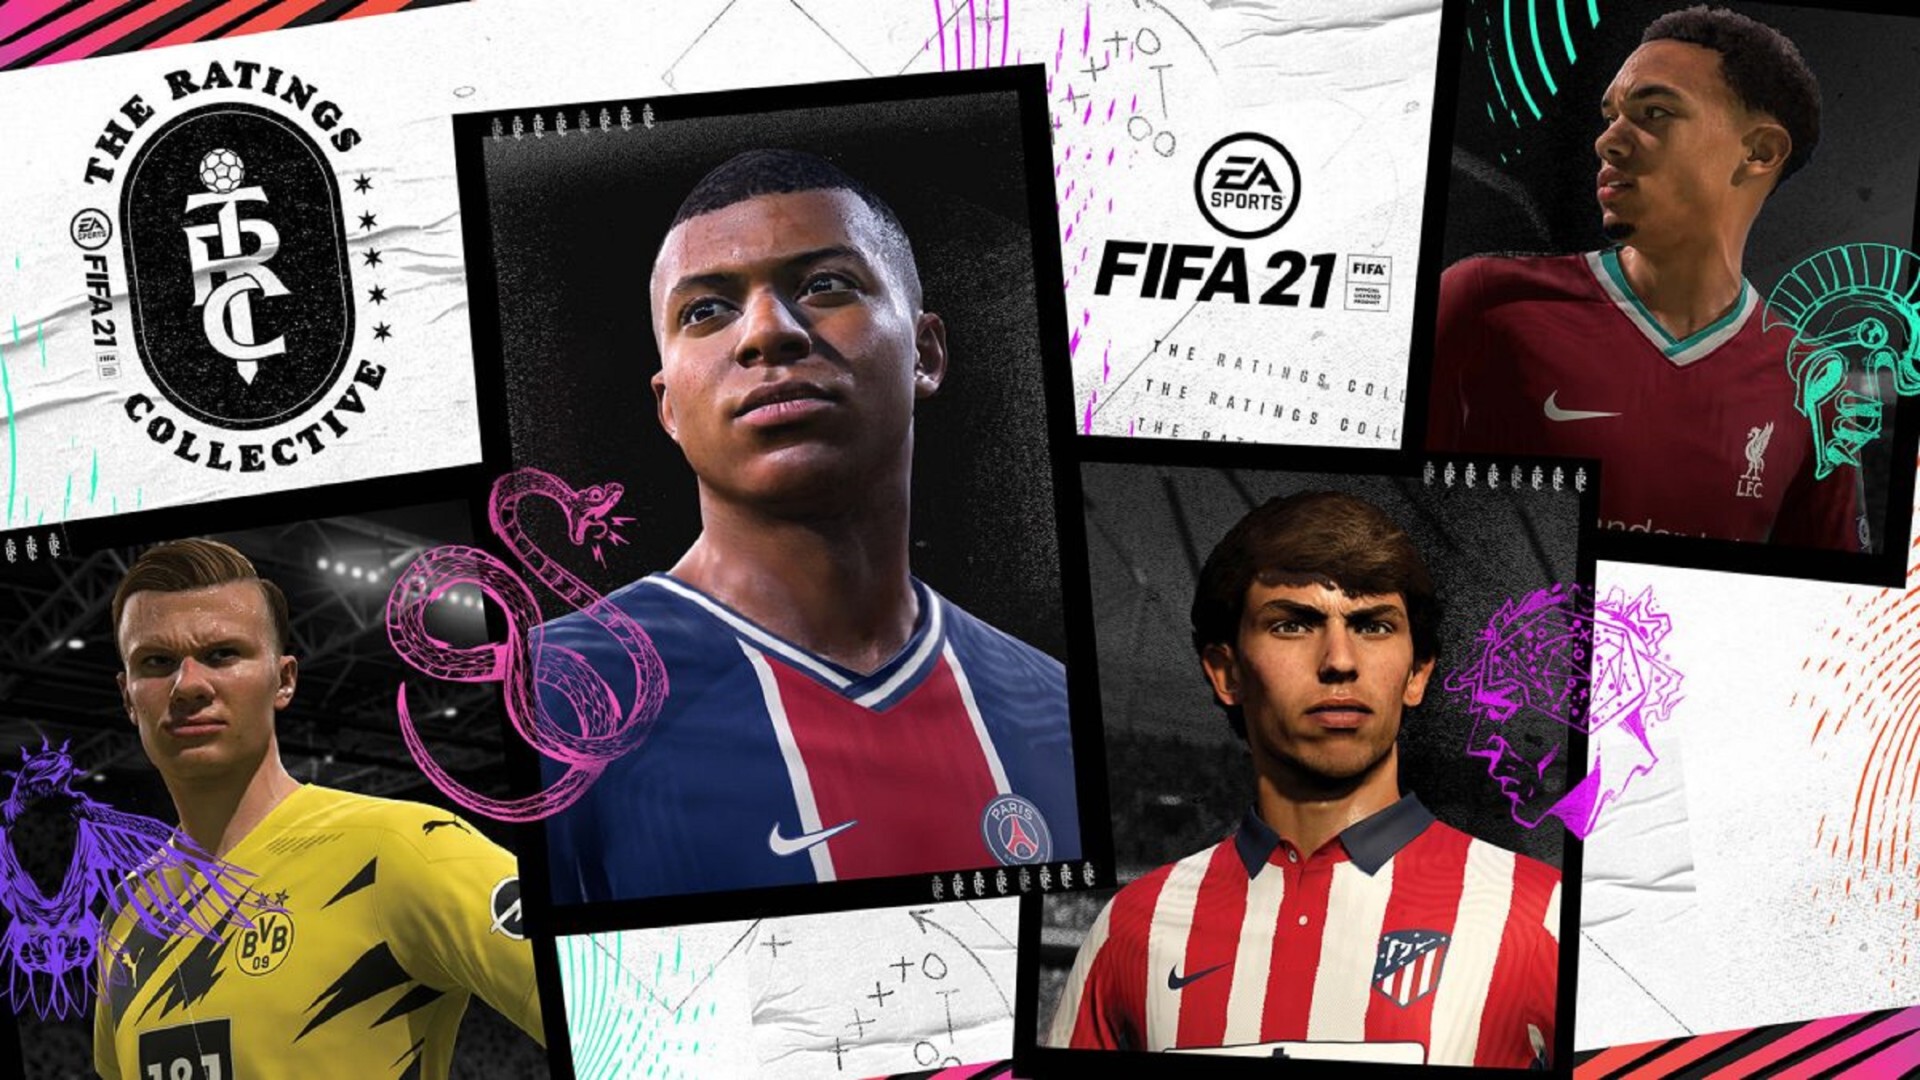 Prime Gaming February 2021: free loot for Roblox, FIFA 21 and Fall